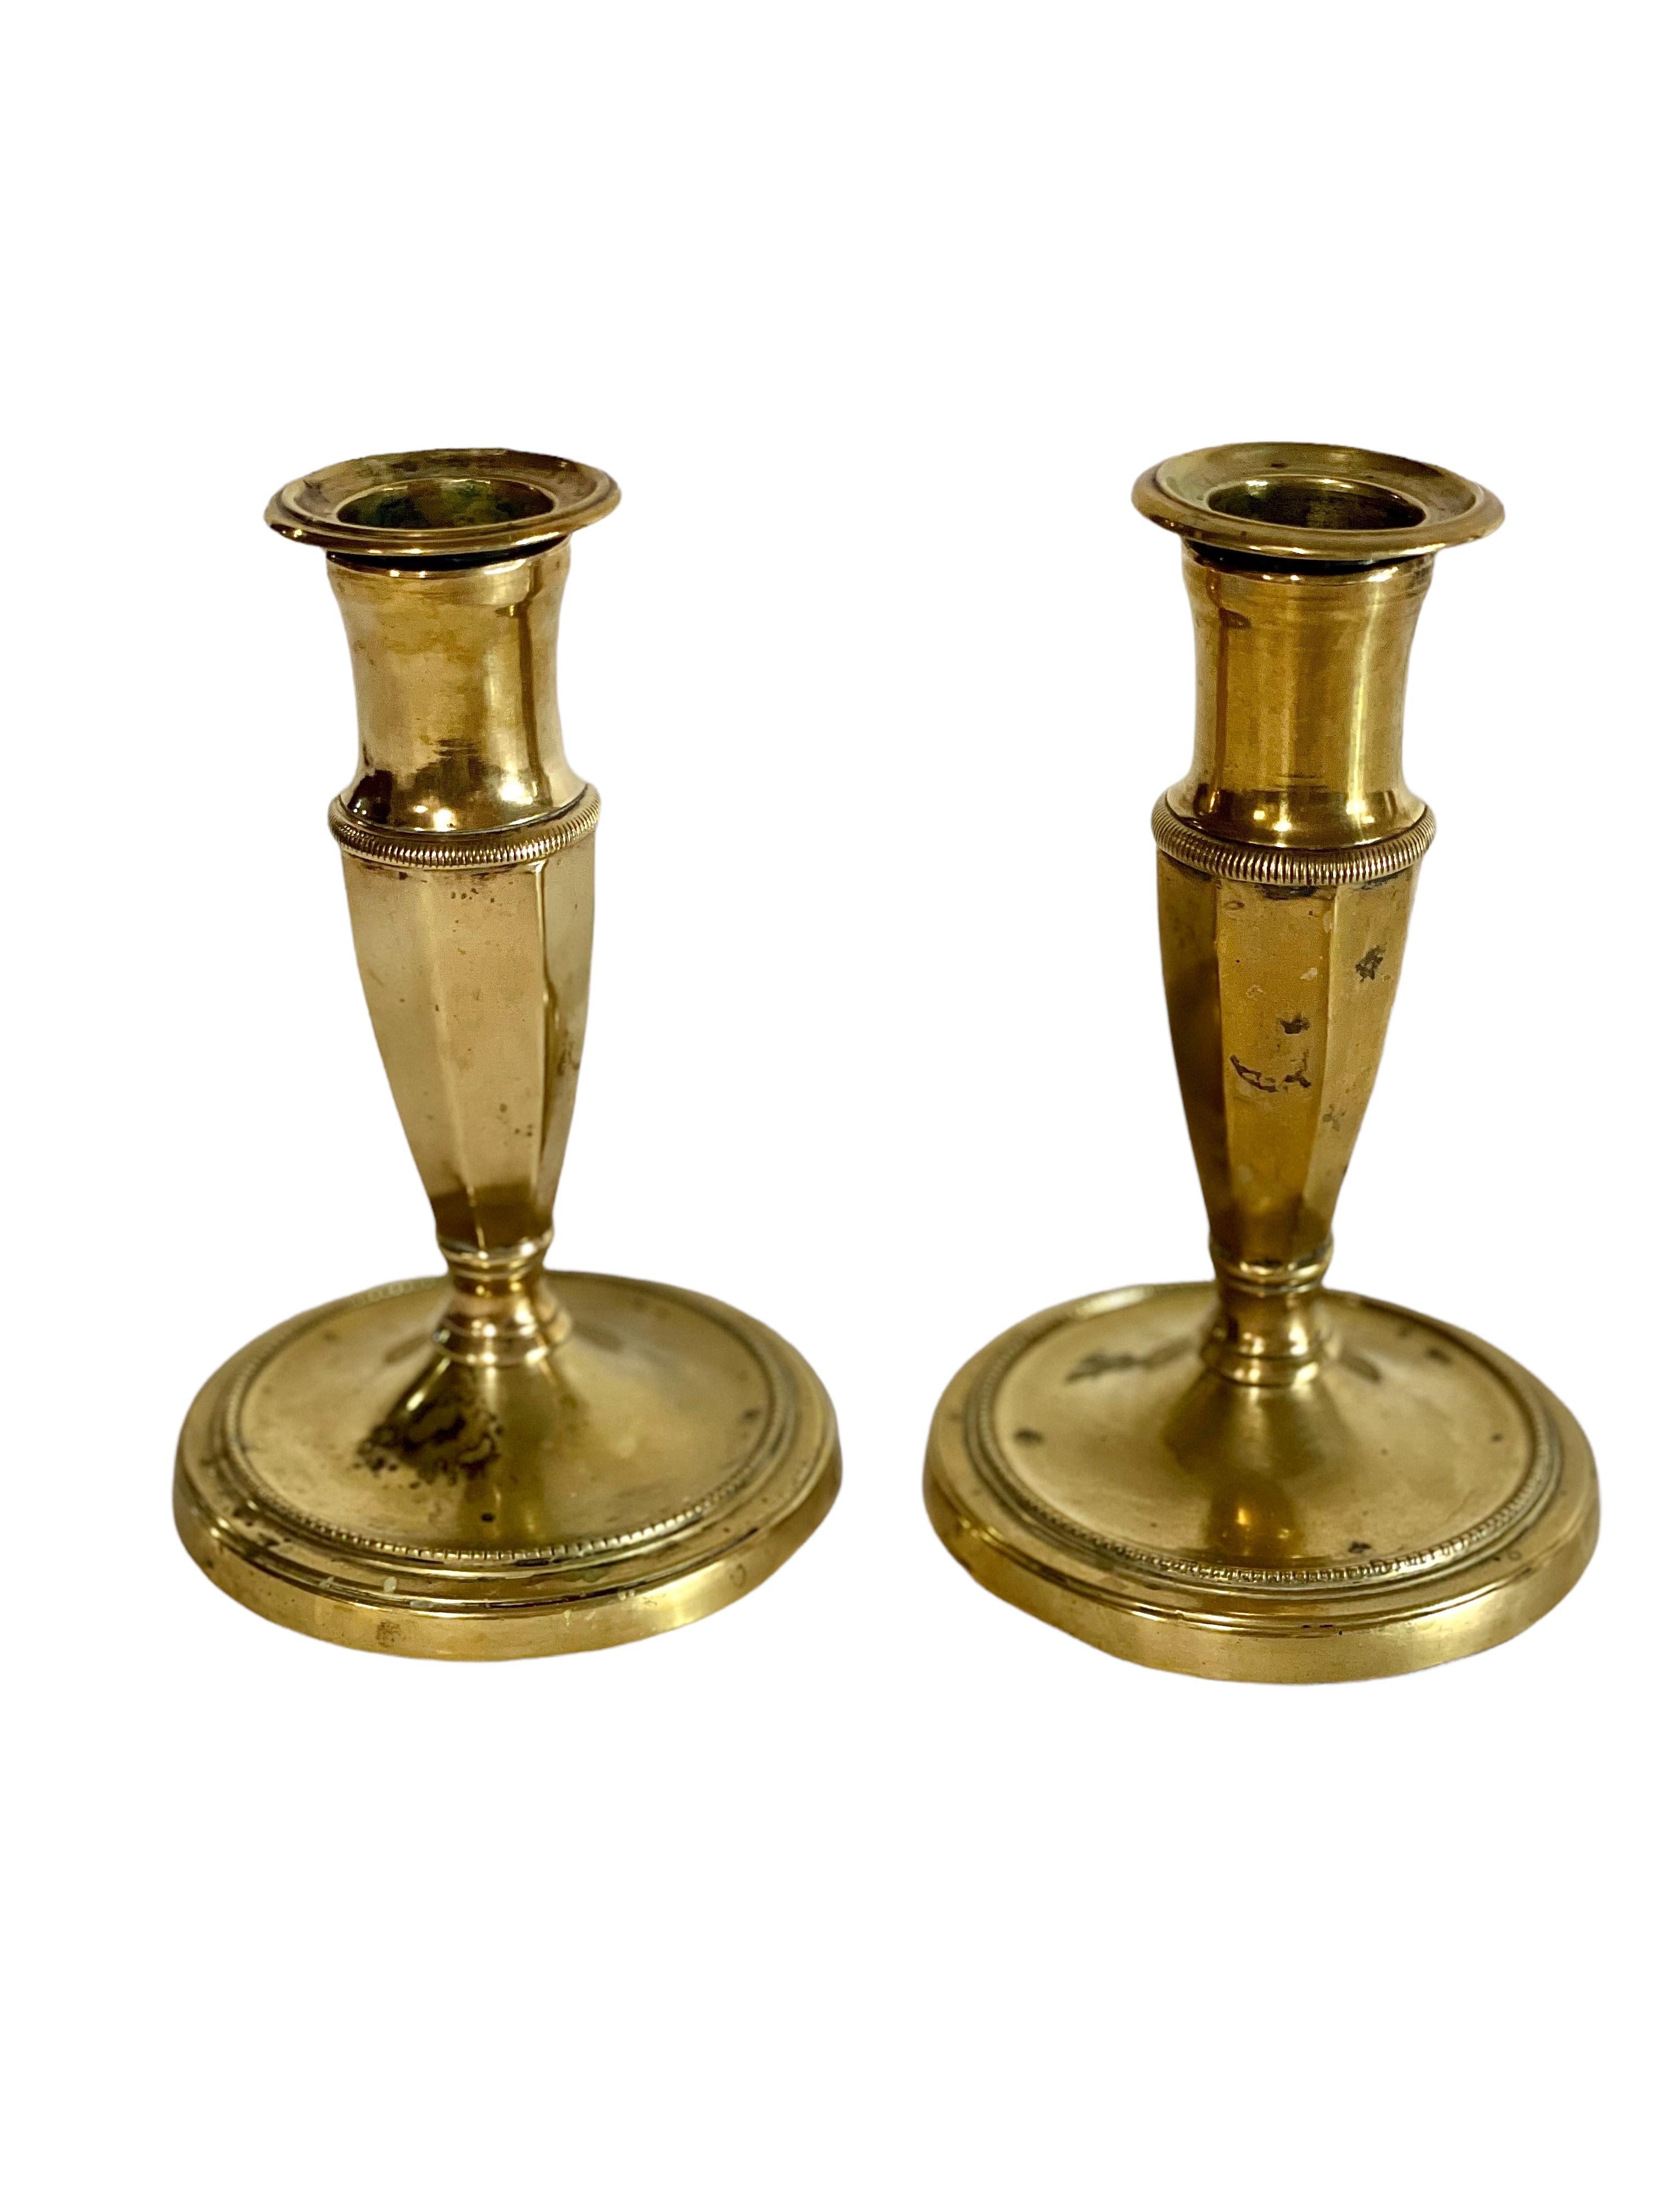 An attractive and very smart pair of French Empire style bronze candlesticks. Their compact size would have made them ideal for travelling. Circular bases, with concentric ring decoration support an elegantly simple and planed stem and candle cup.